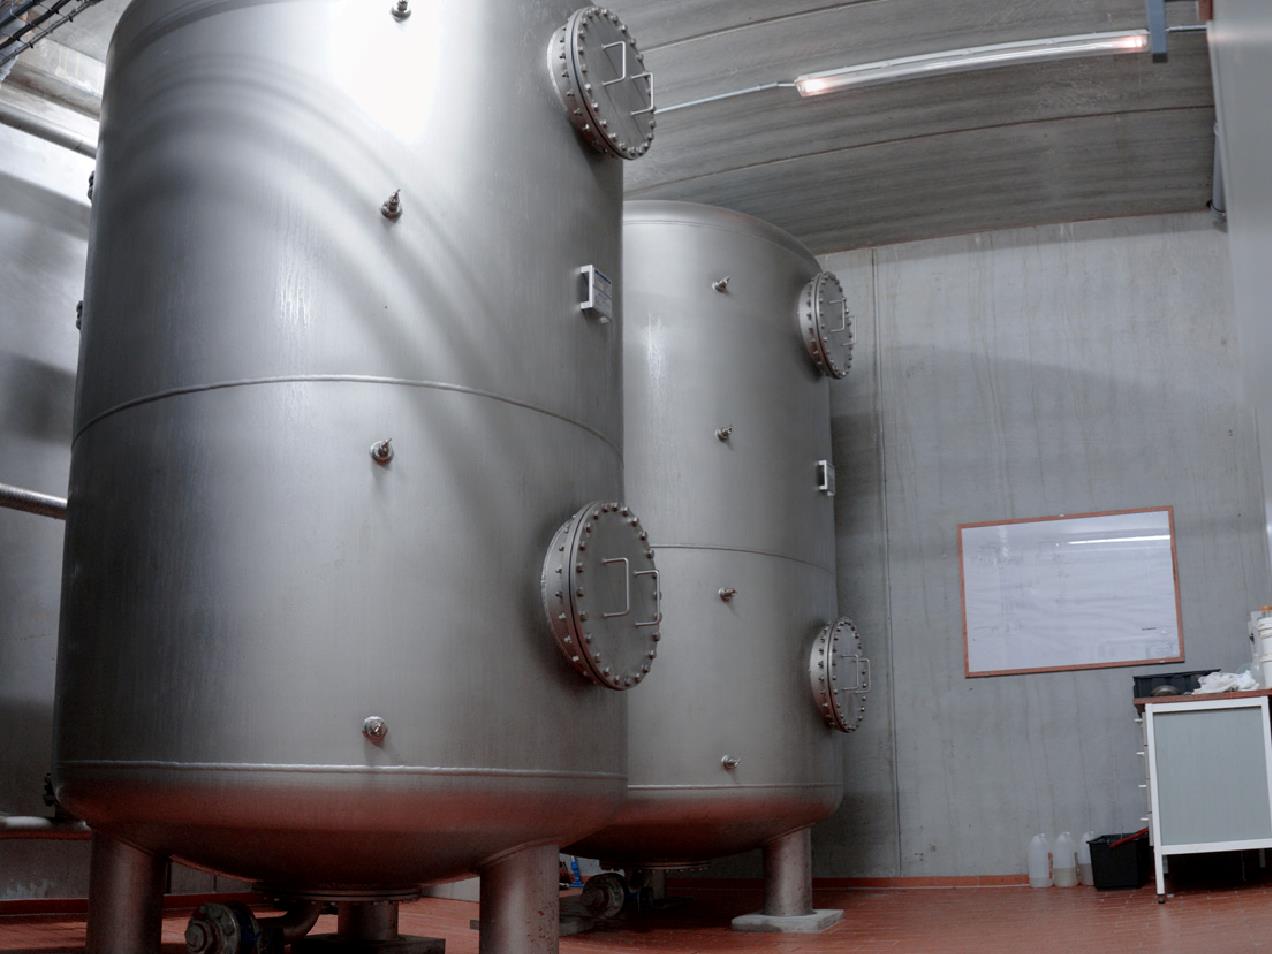 https://www.eurowater.com/admin/public/getimage.ashx?Crop=0&Image=/Files/Images/eurowater/Common/On-site/Activated_carbon_filter_brewery_Eurowater_Denmark.jpg&Format=jpg&Width=1272&Height=954&Quality=75